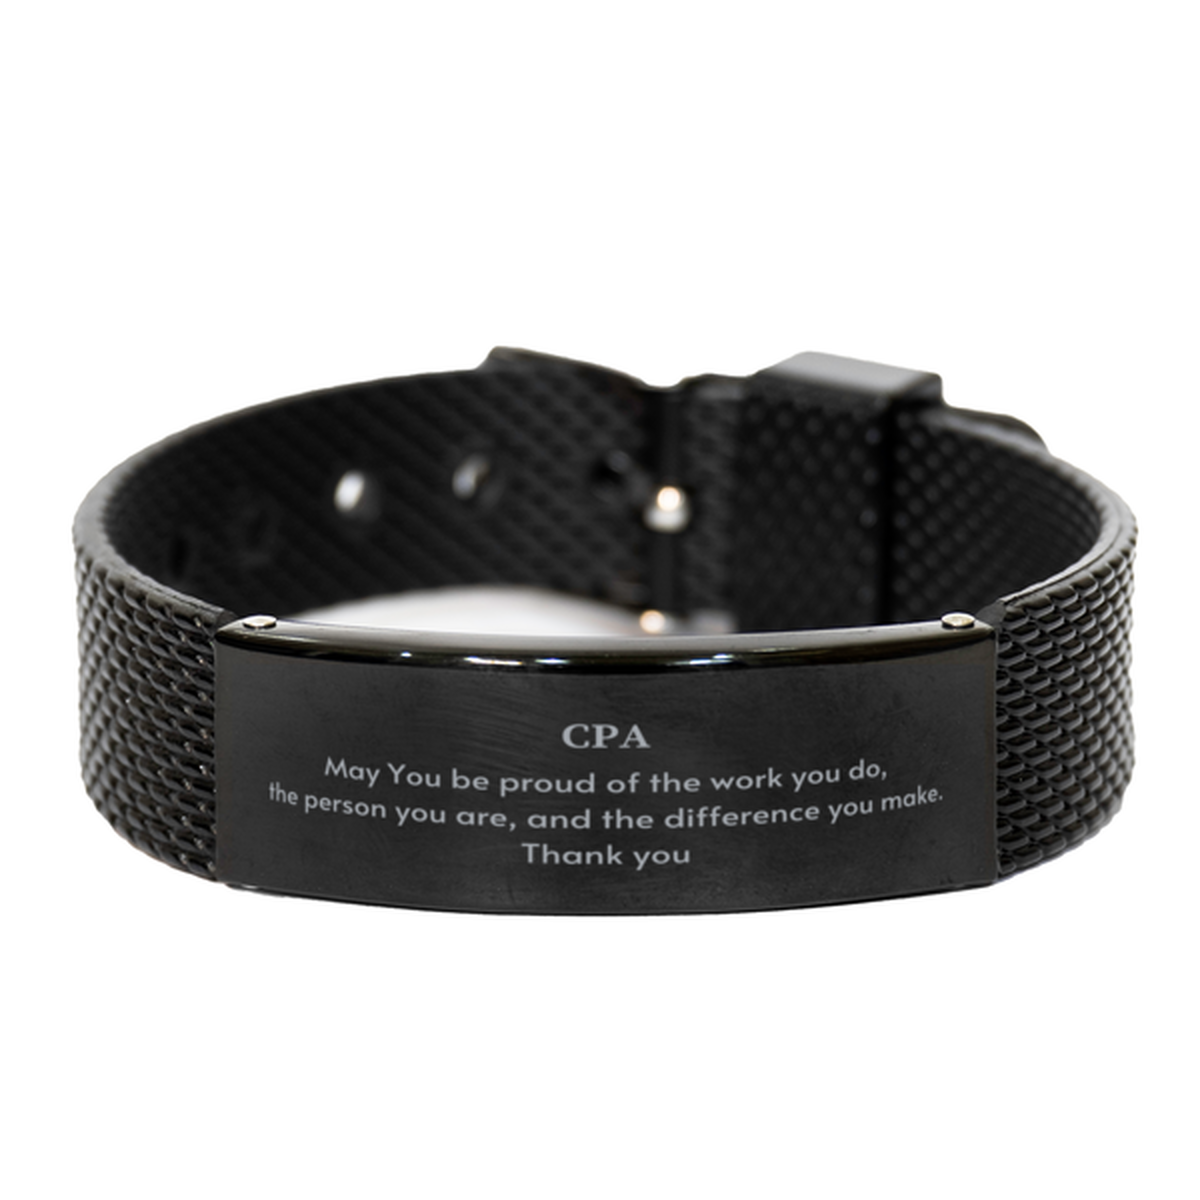 Heartwarming Black Shark Mesh Bracelet Retirement Coworkers Gifts for CPA, CPA May You be proud of the work you do, the person you are Gifts for Boss Men Women Friends